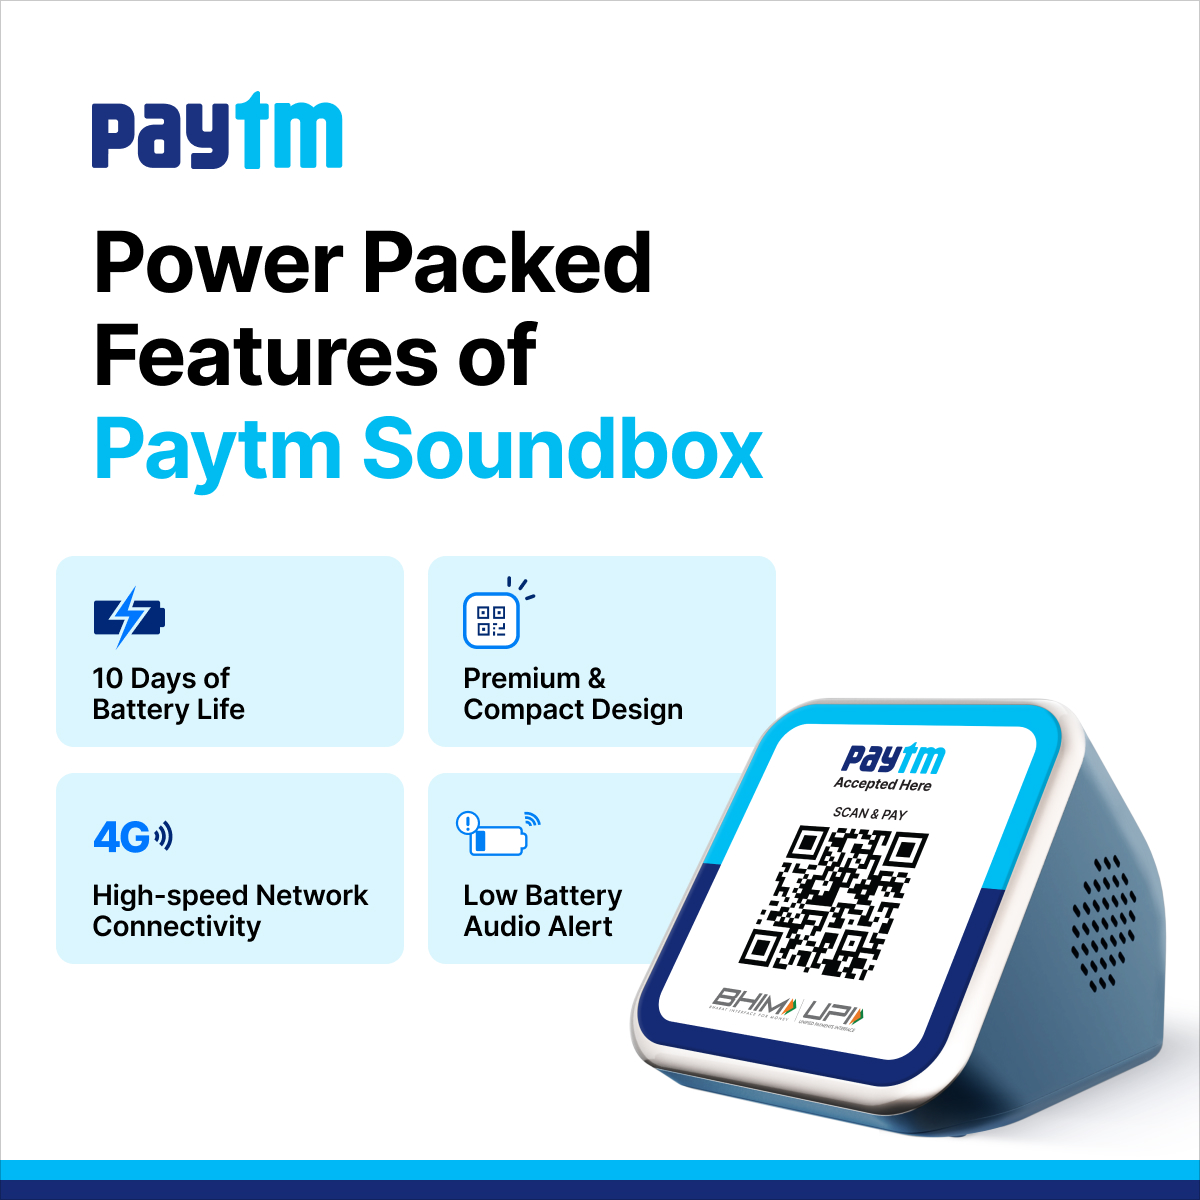 The New and Improved Made-in-India Soundbox for UPI and Credit Card on UPI payments🚀

With 10-day battery life and 4G High-speed network connectivity, our innovative device comes with power-packed features. Order your Paytm Soundbox here: business.paytm.me/ksjN/6xei94mi

#PaytmKaro